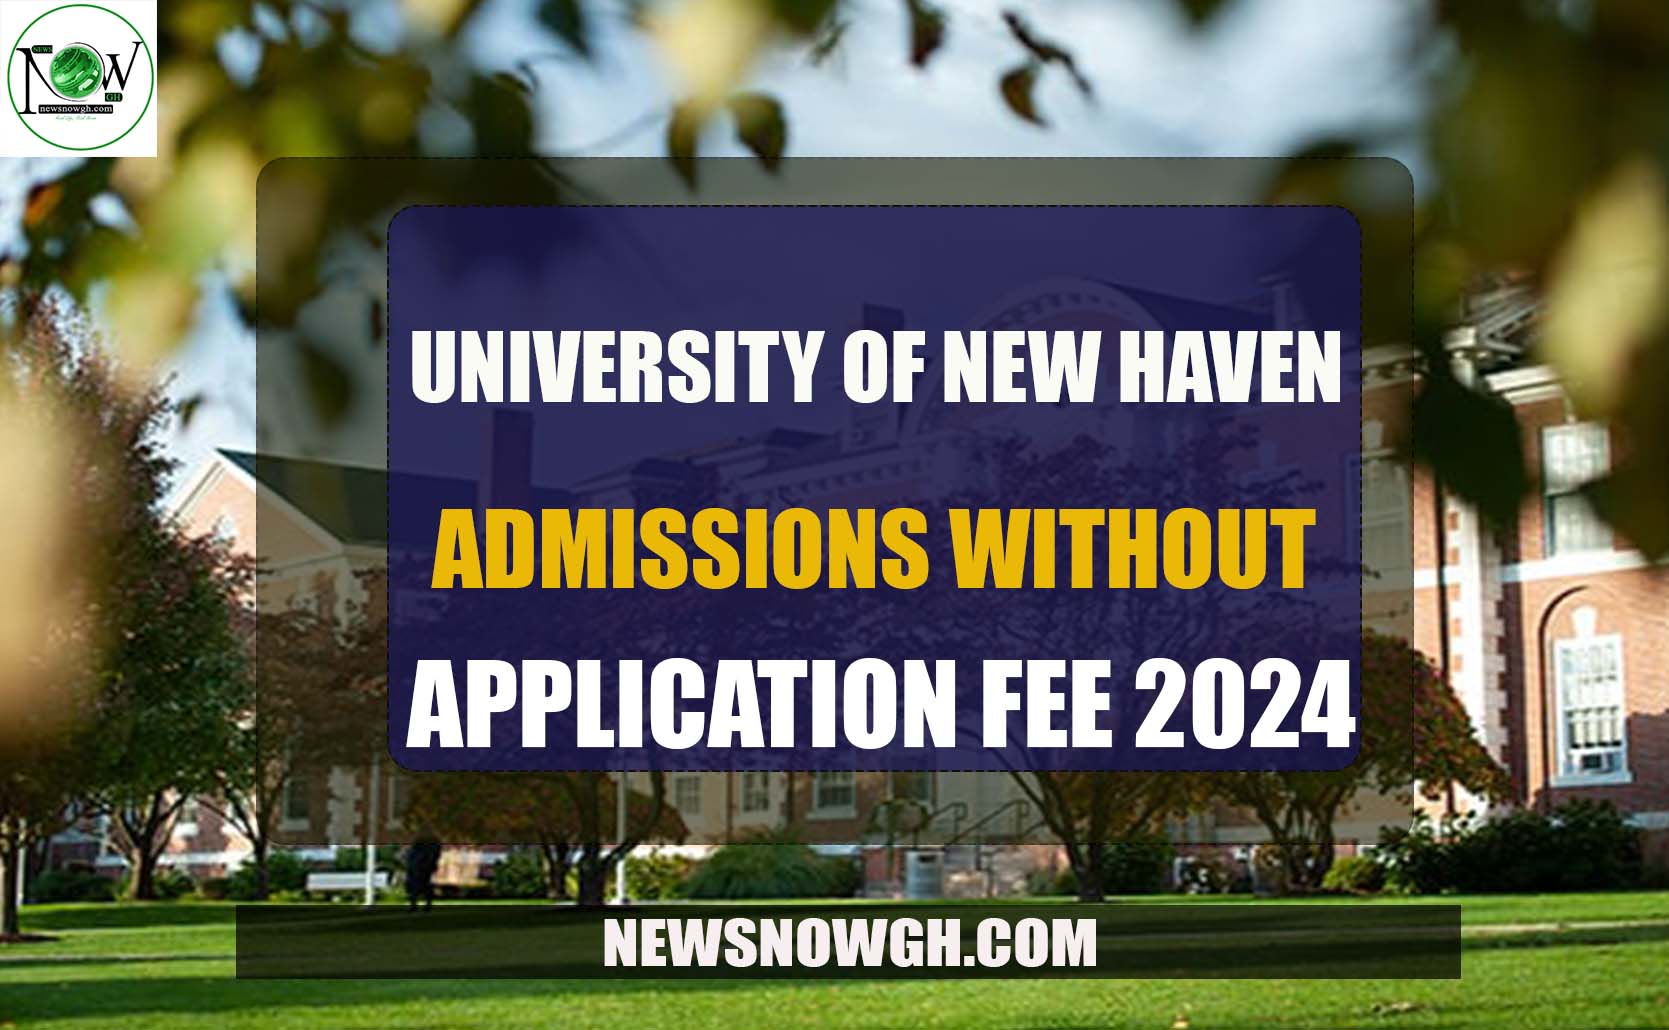 University of New Haven admissions without application fee 2024